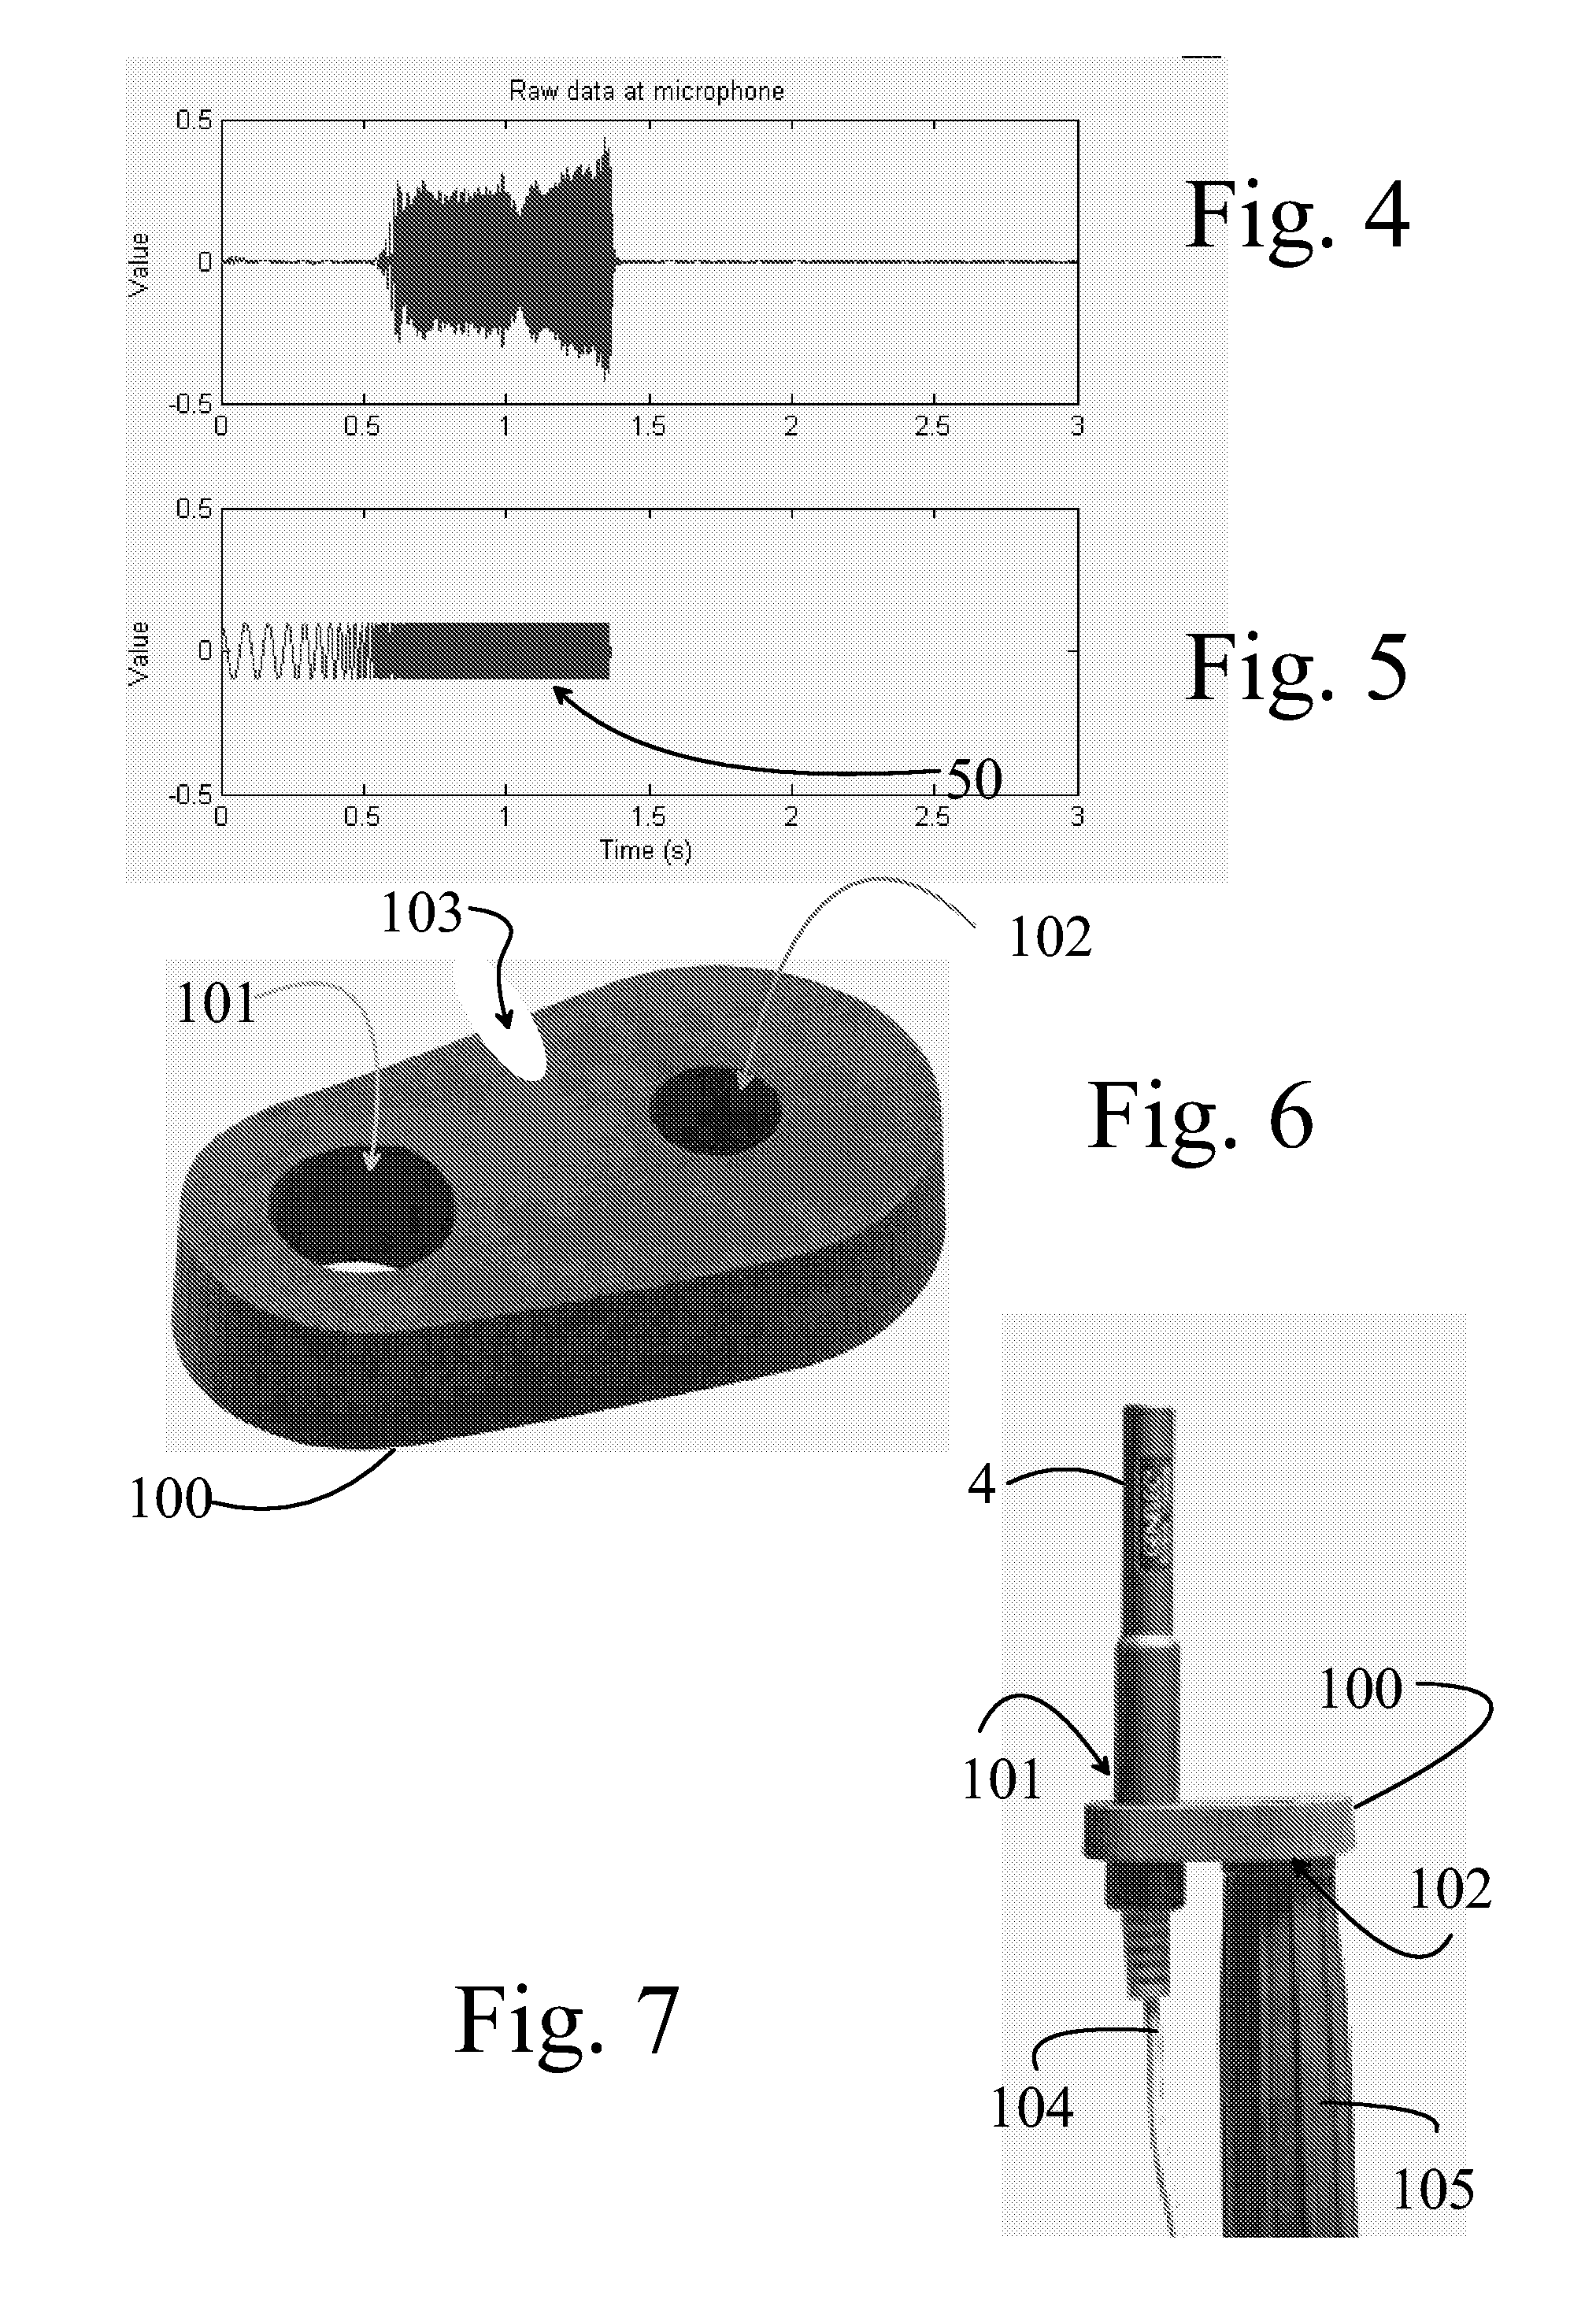 Equipment, method and use of the equipment in an audio system